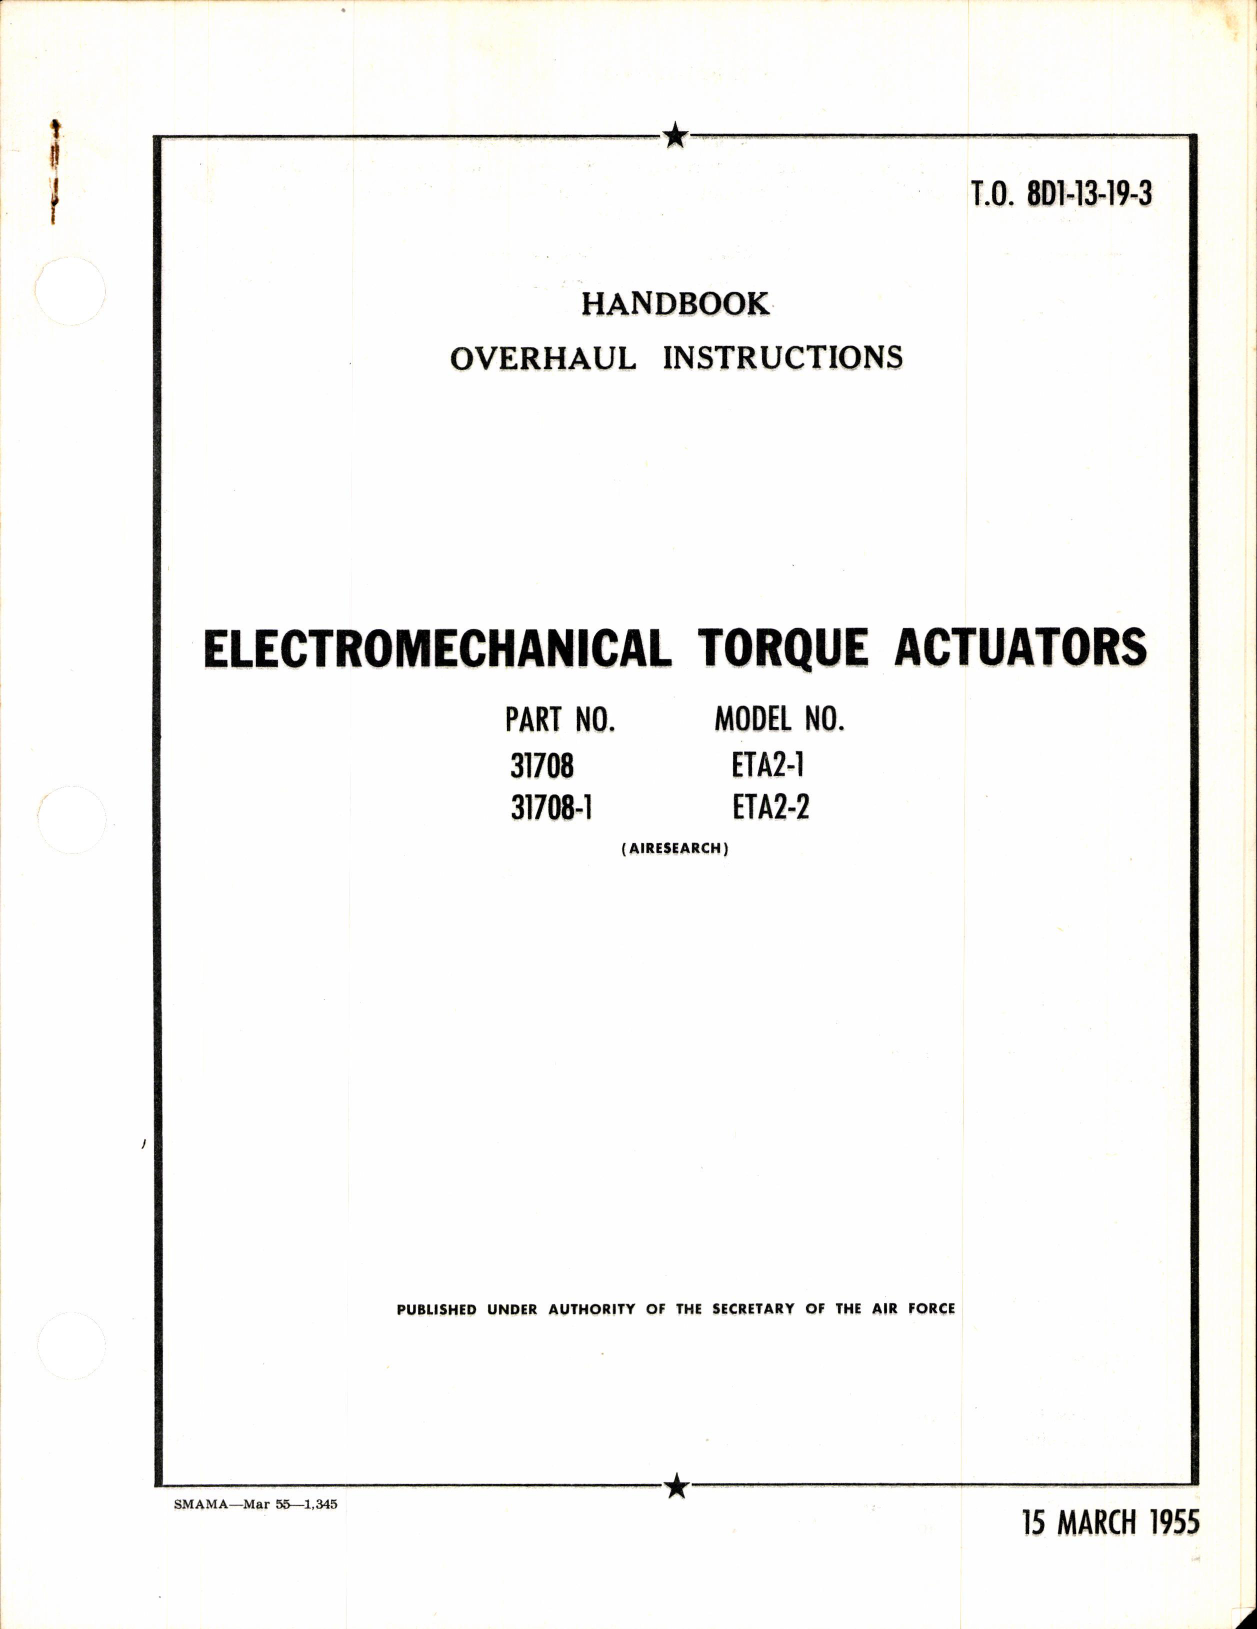 Sample page 1 from AirCorps Library document: Overhaul Instructions for Electromechanical Torque Actuators